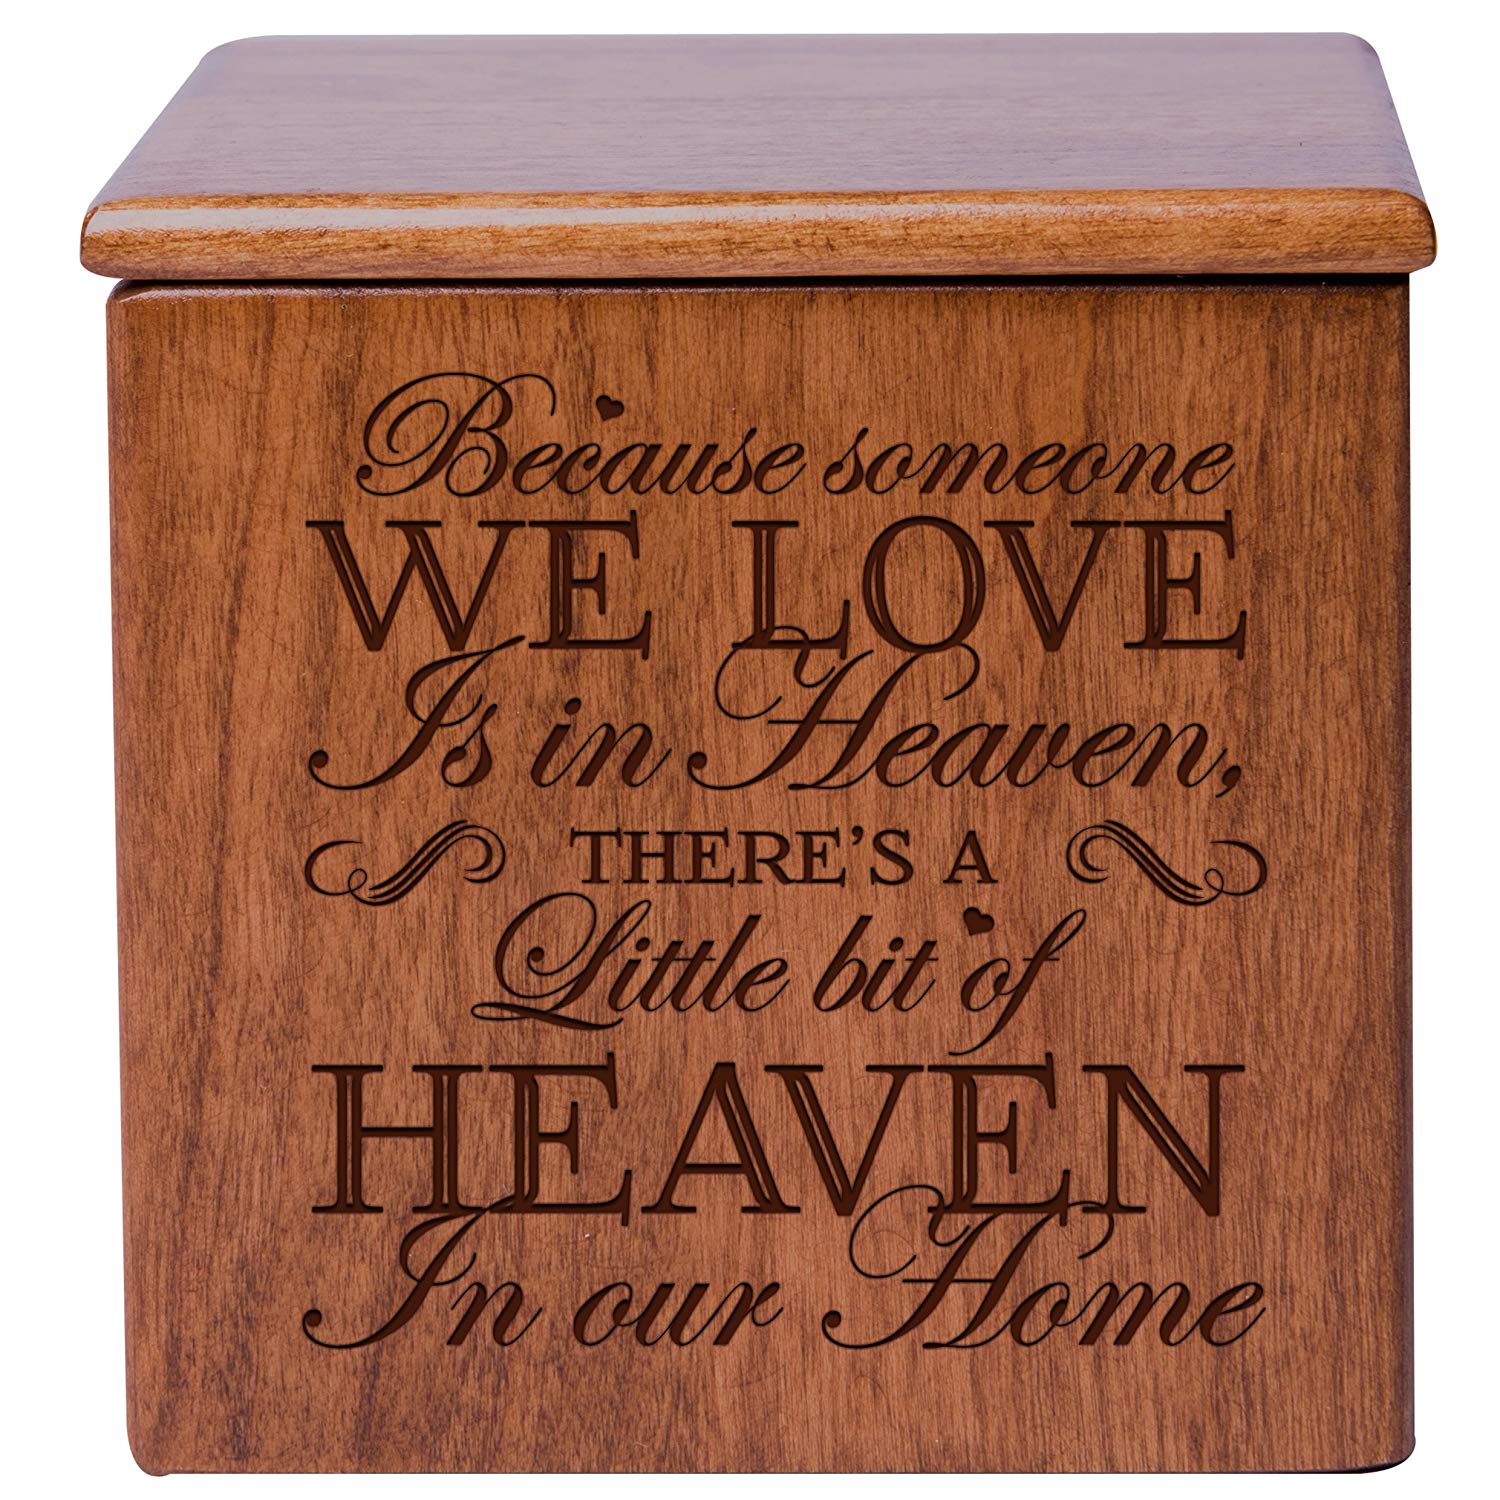 human urn ashes memorial funeral adult child cherry